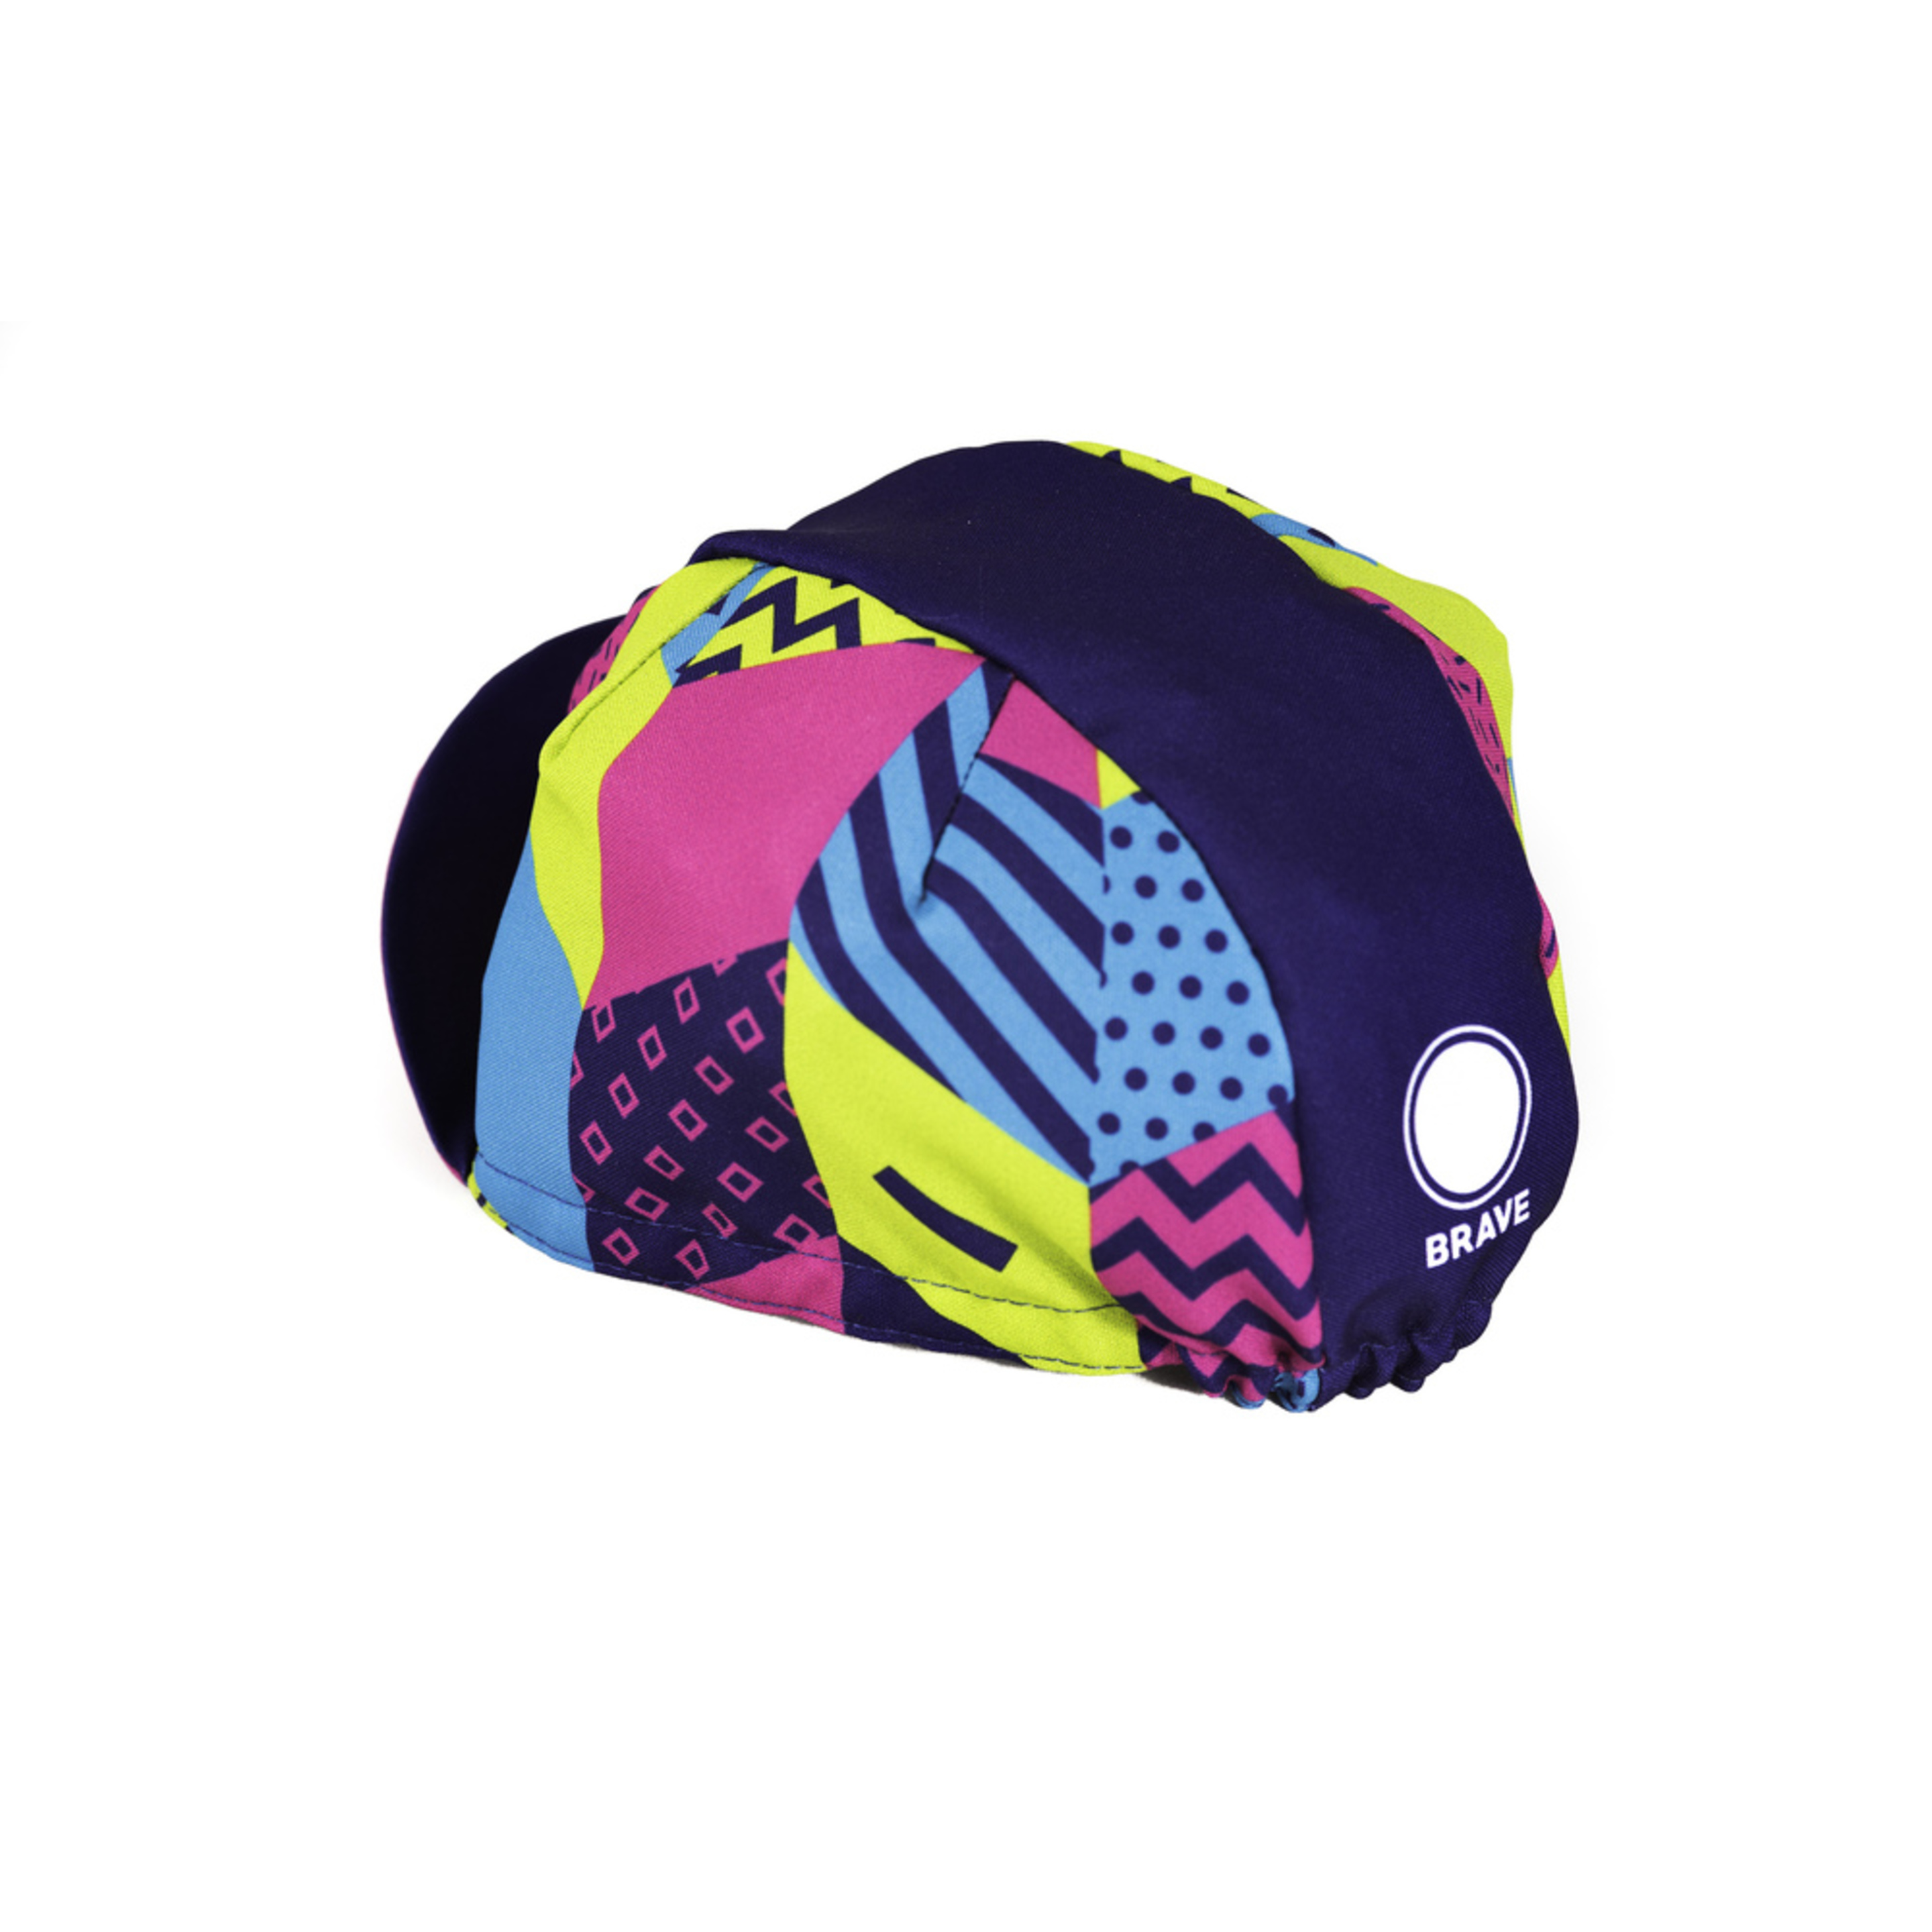 Gorras Ciclismo The One Brave